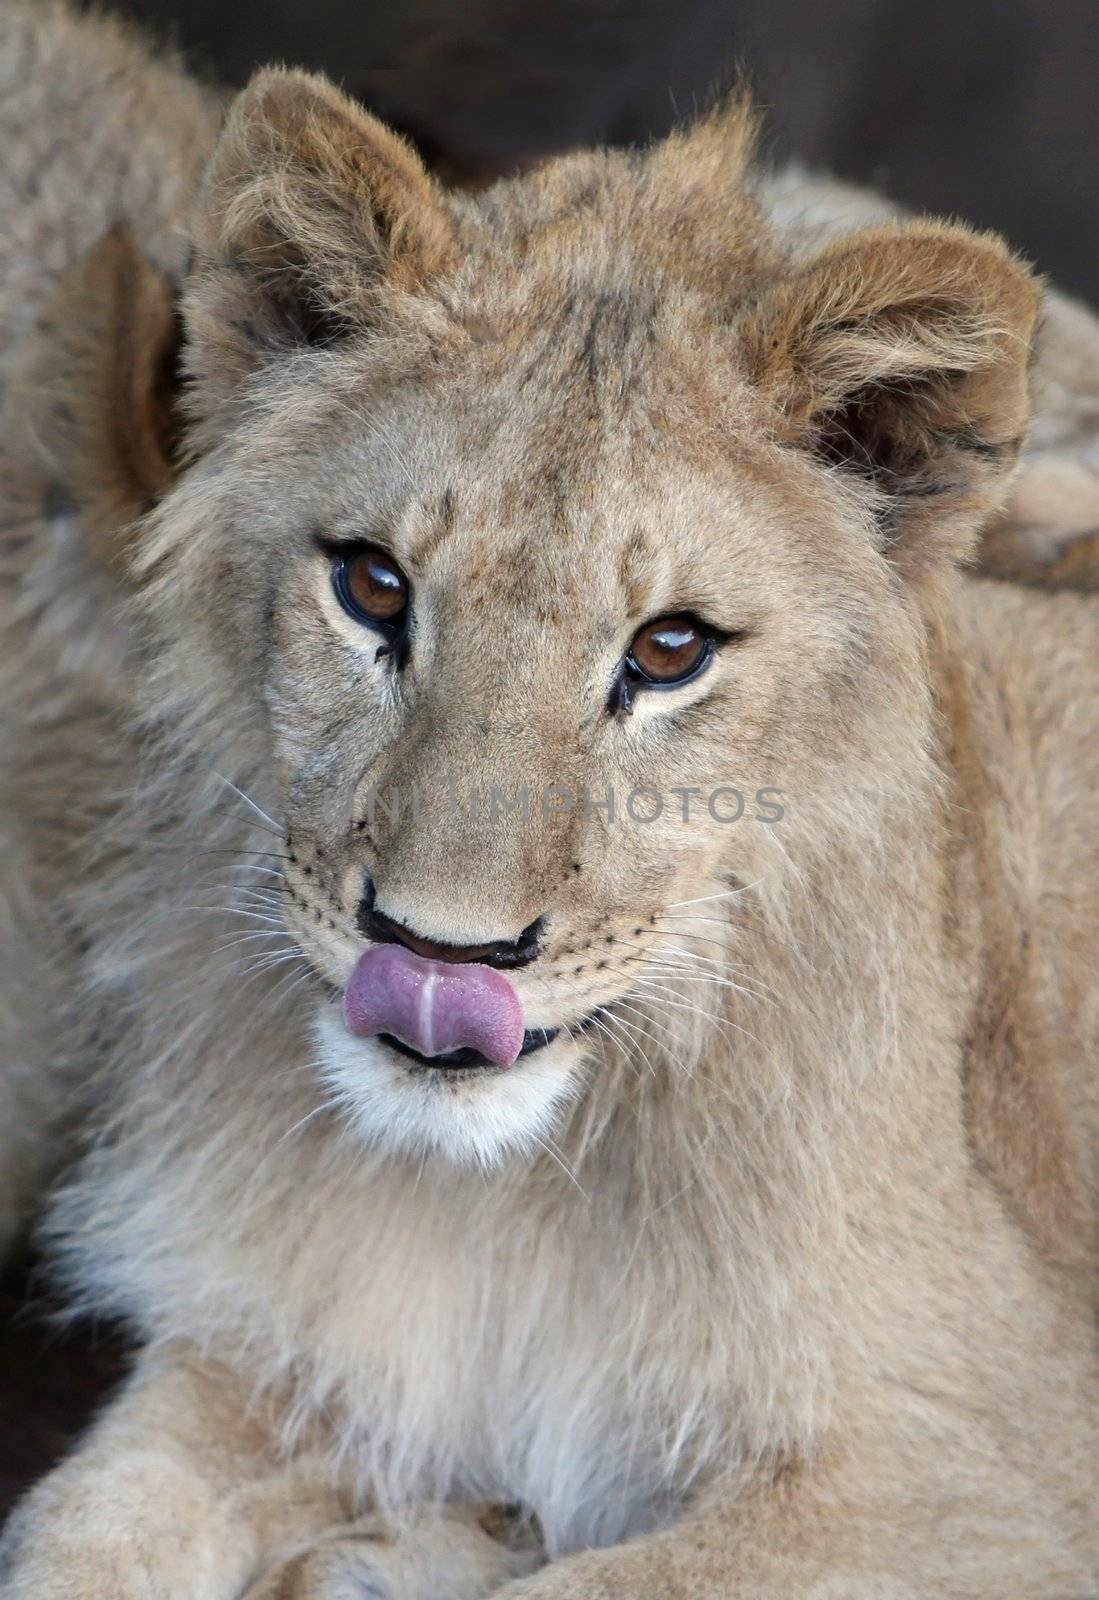 A cute young lion from Africa showing it's pink tongue